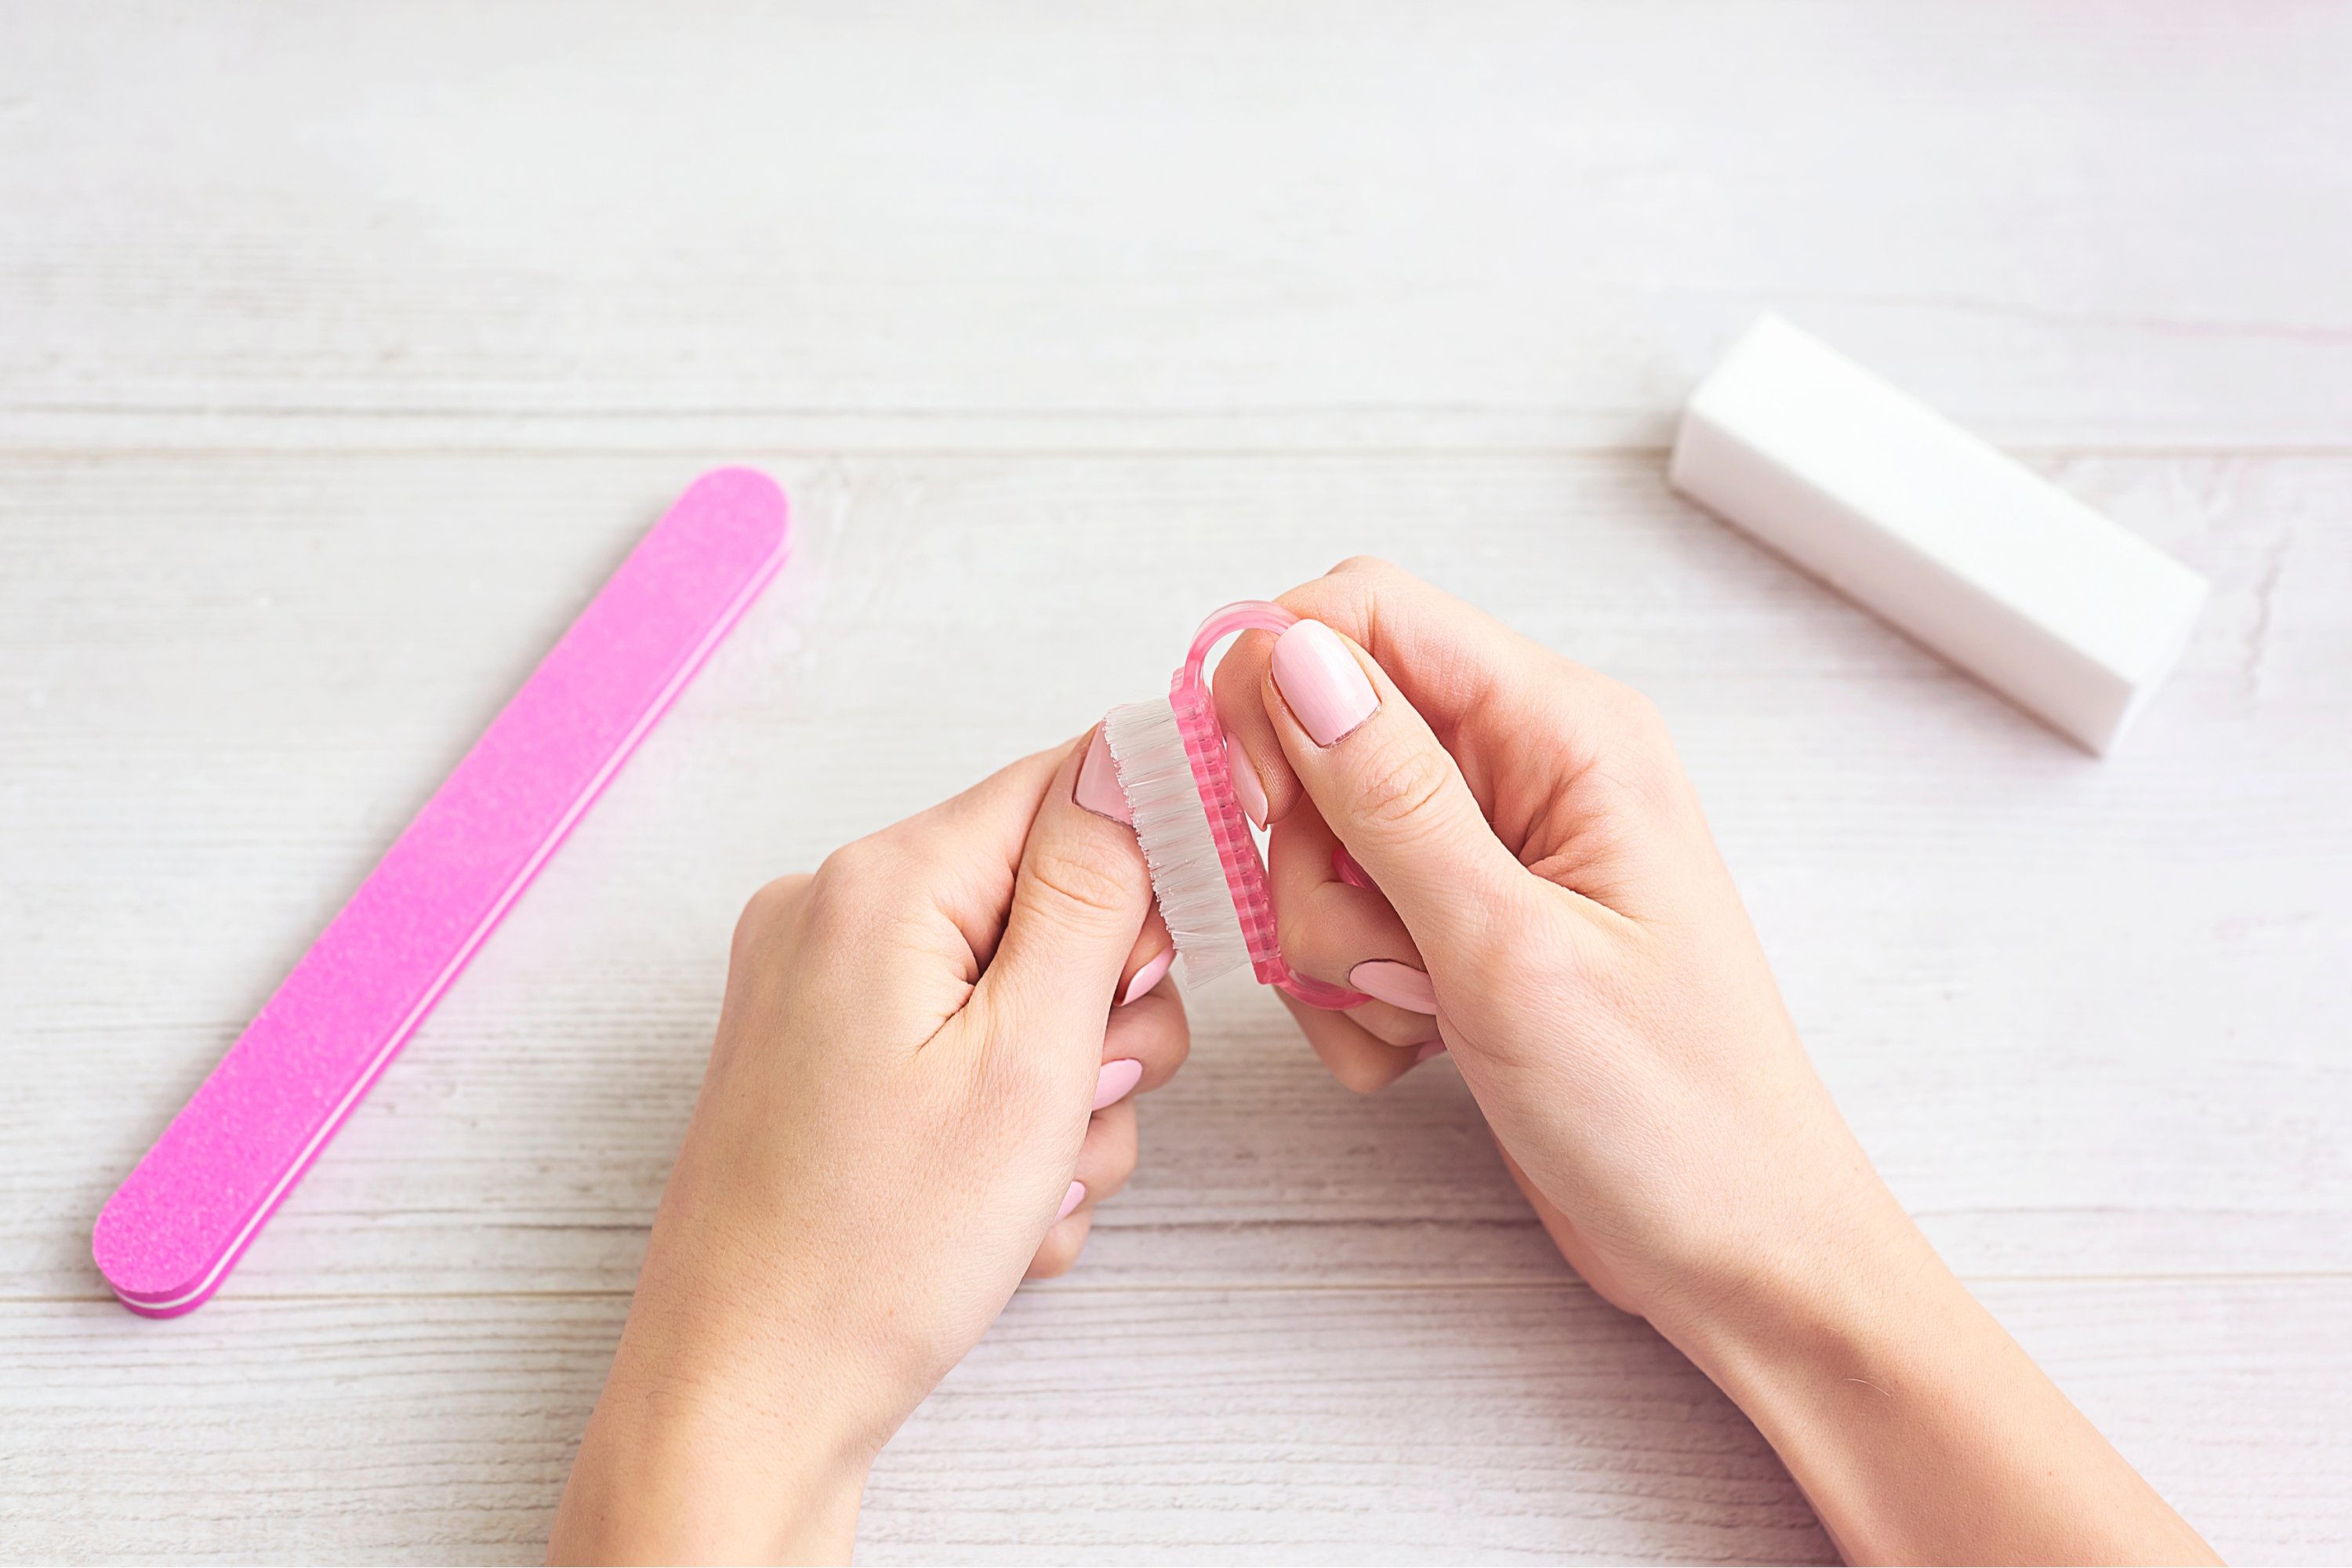 Experts recommend using a nailbrush after every time you wash your hands to get rid of all germs. (Shutterstock Photo)